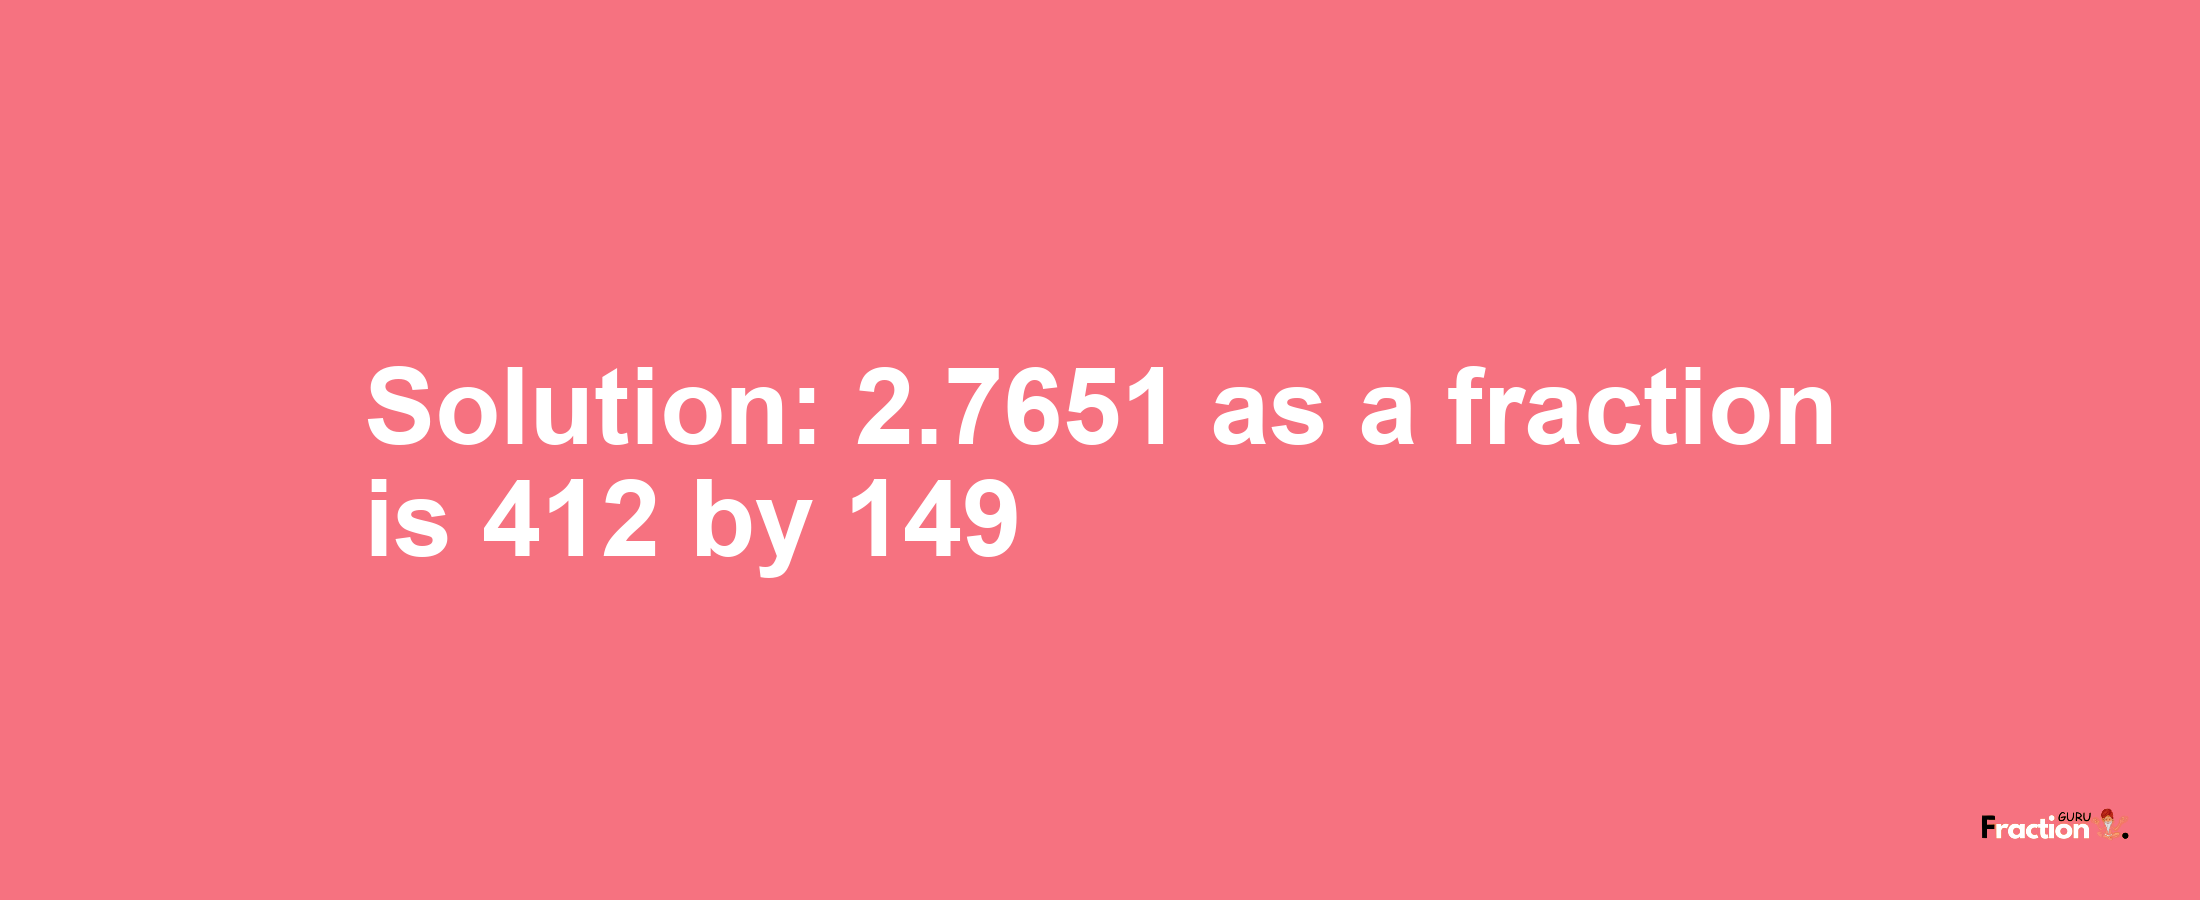 Solution:2.7651 as a fraction is 412/149